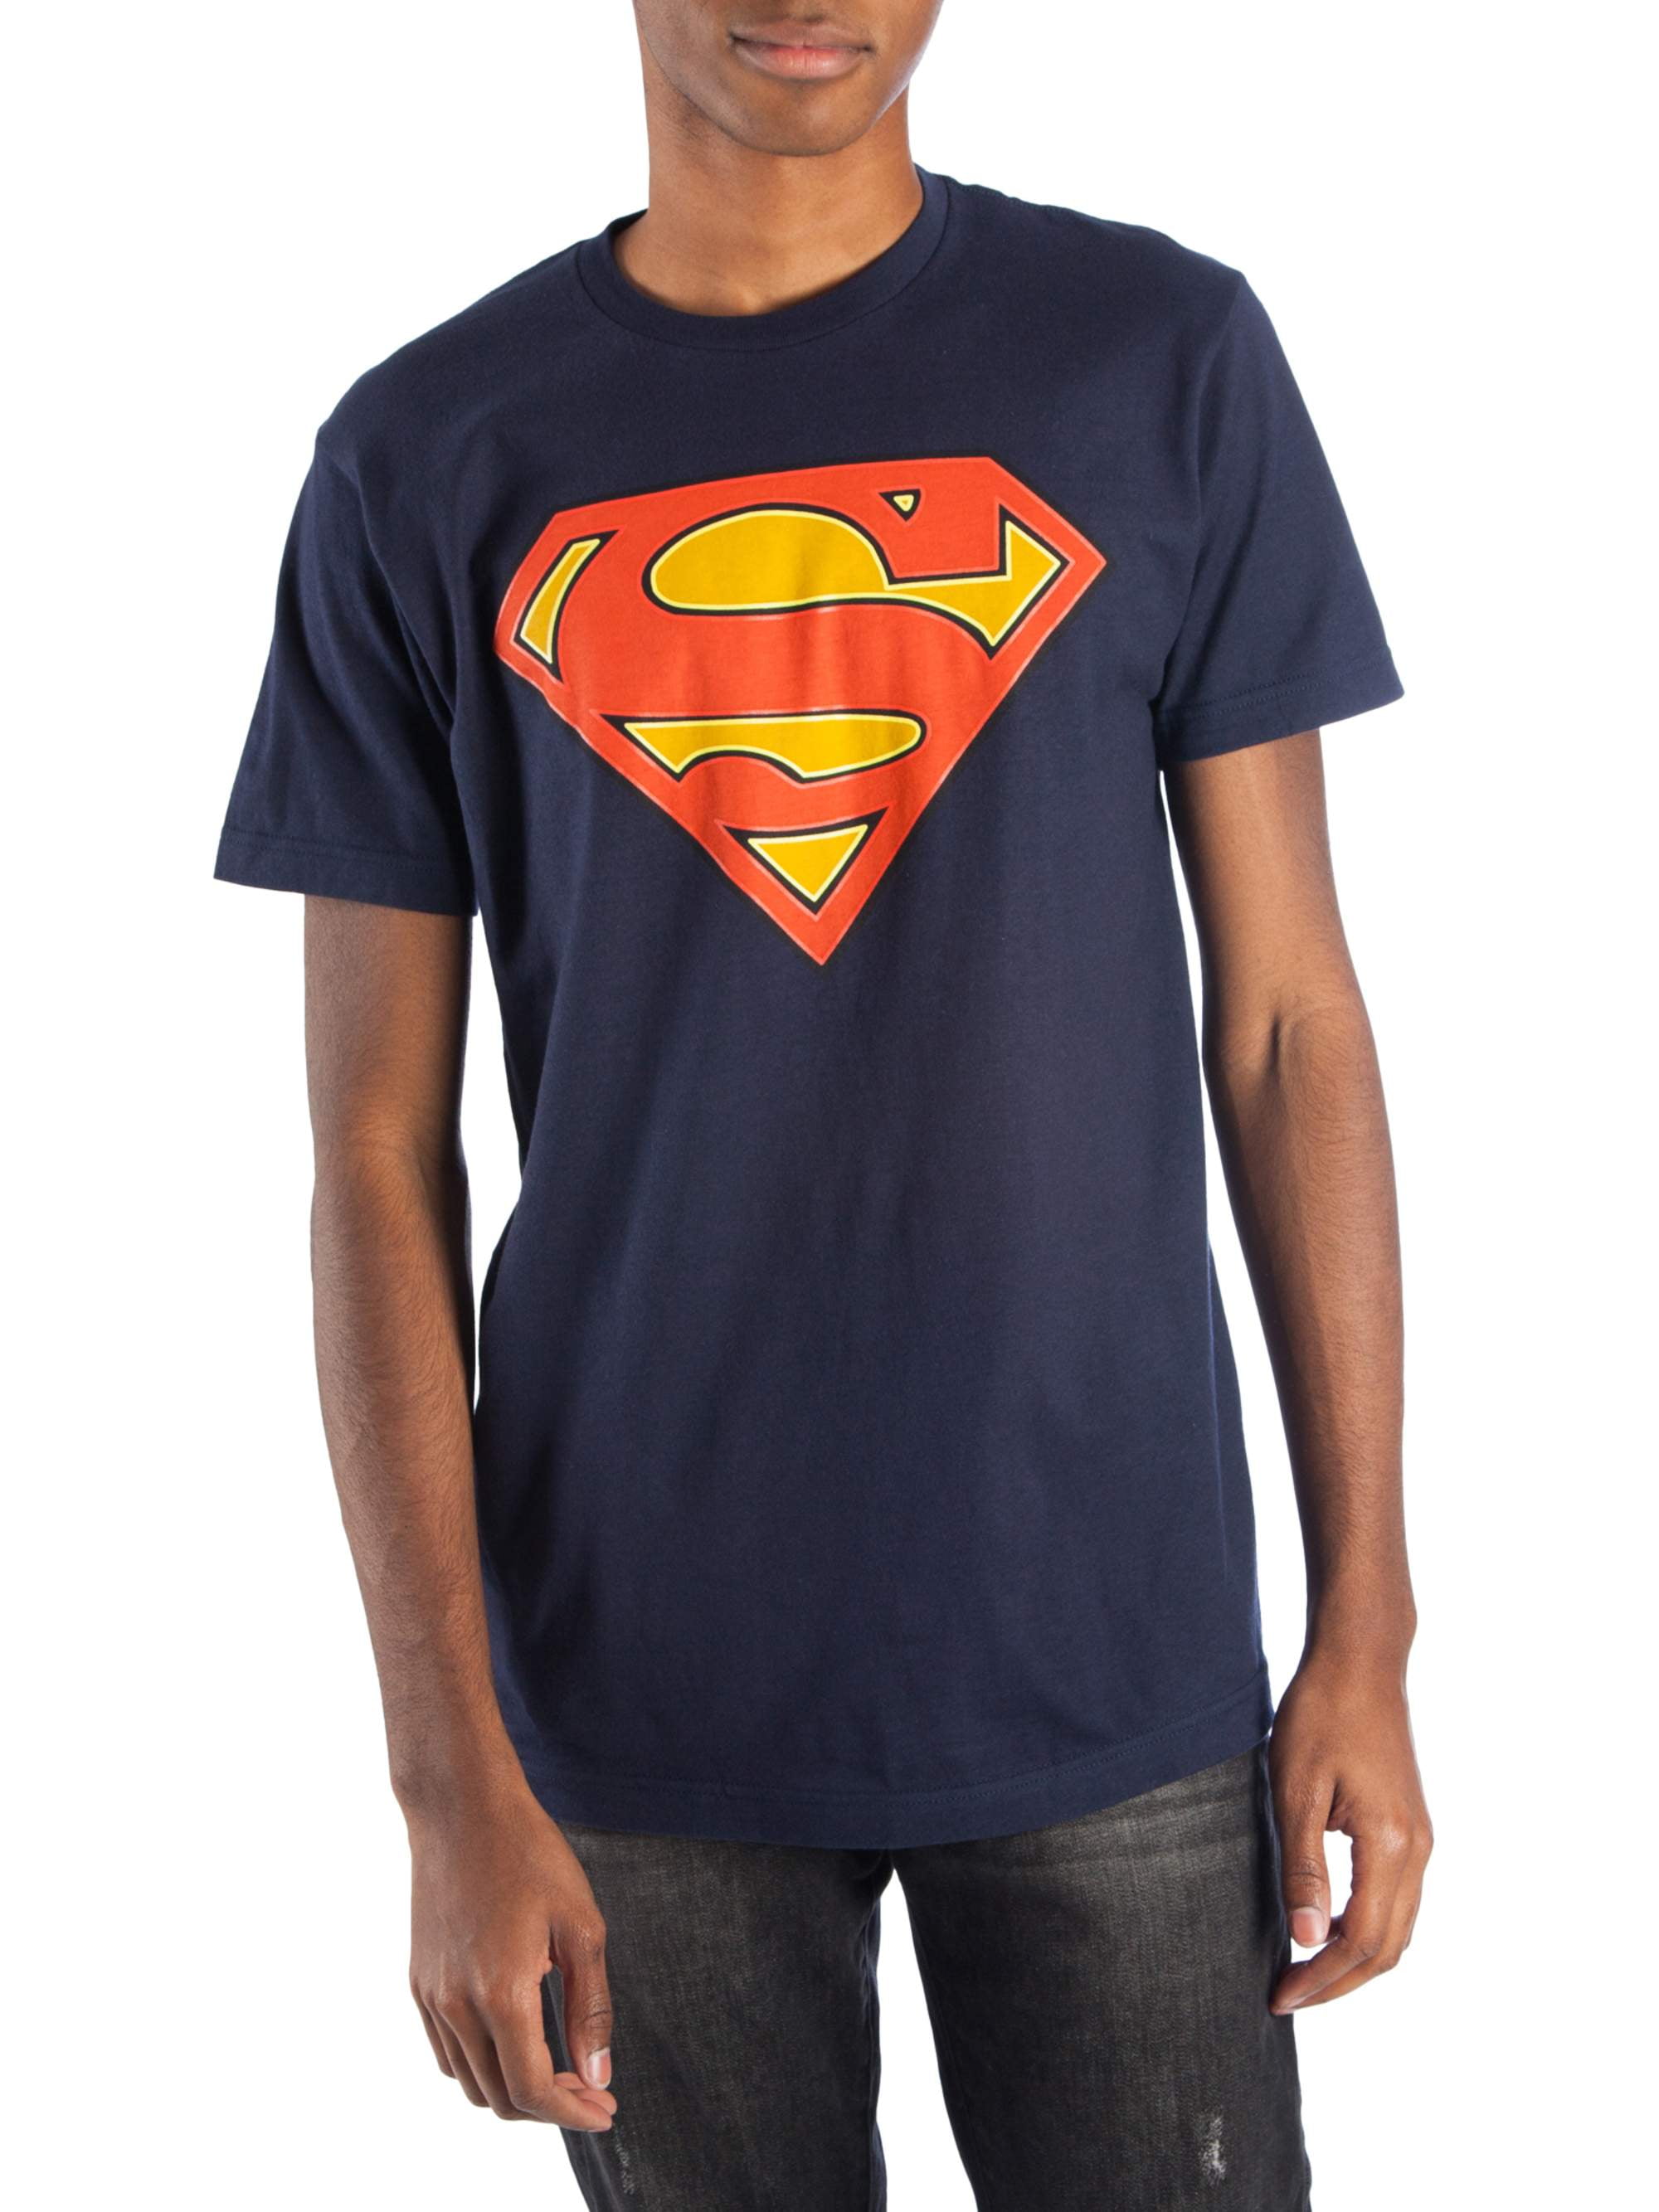 JESUS SUPERMAN T SHIRT IRON ON TRANSFER DARK OR ANY COLOR MATERIAL 